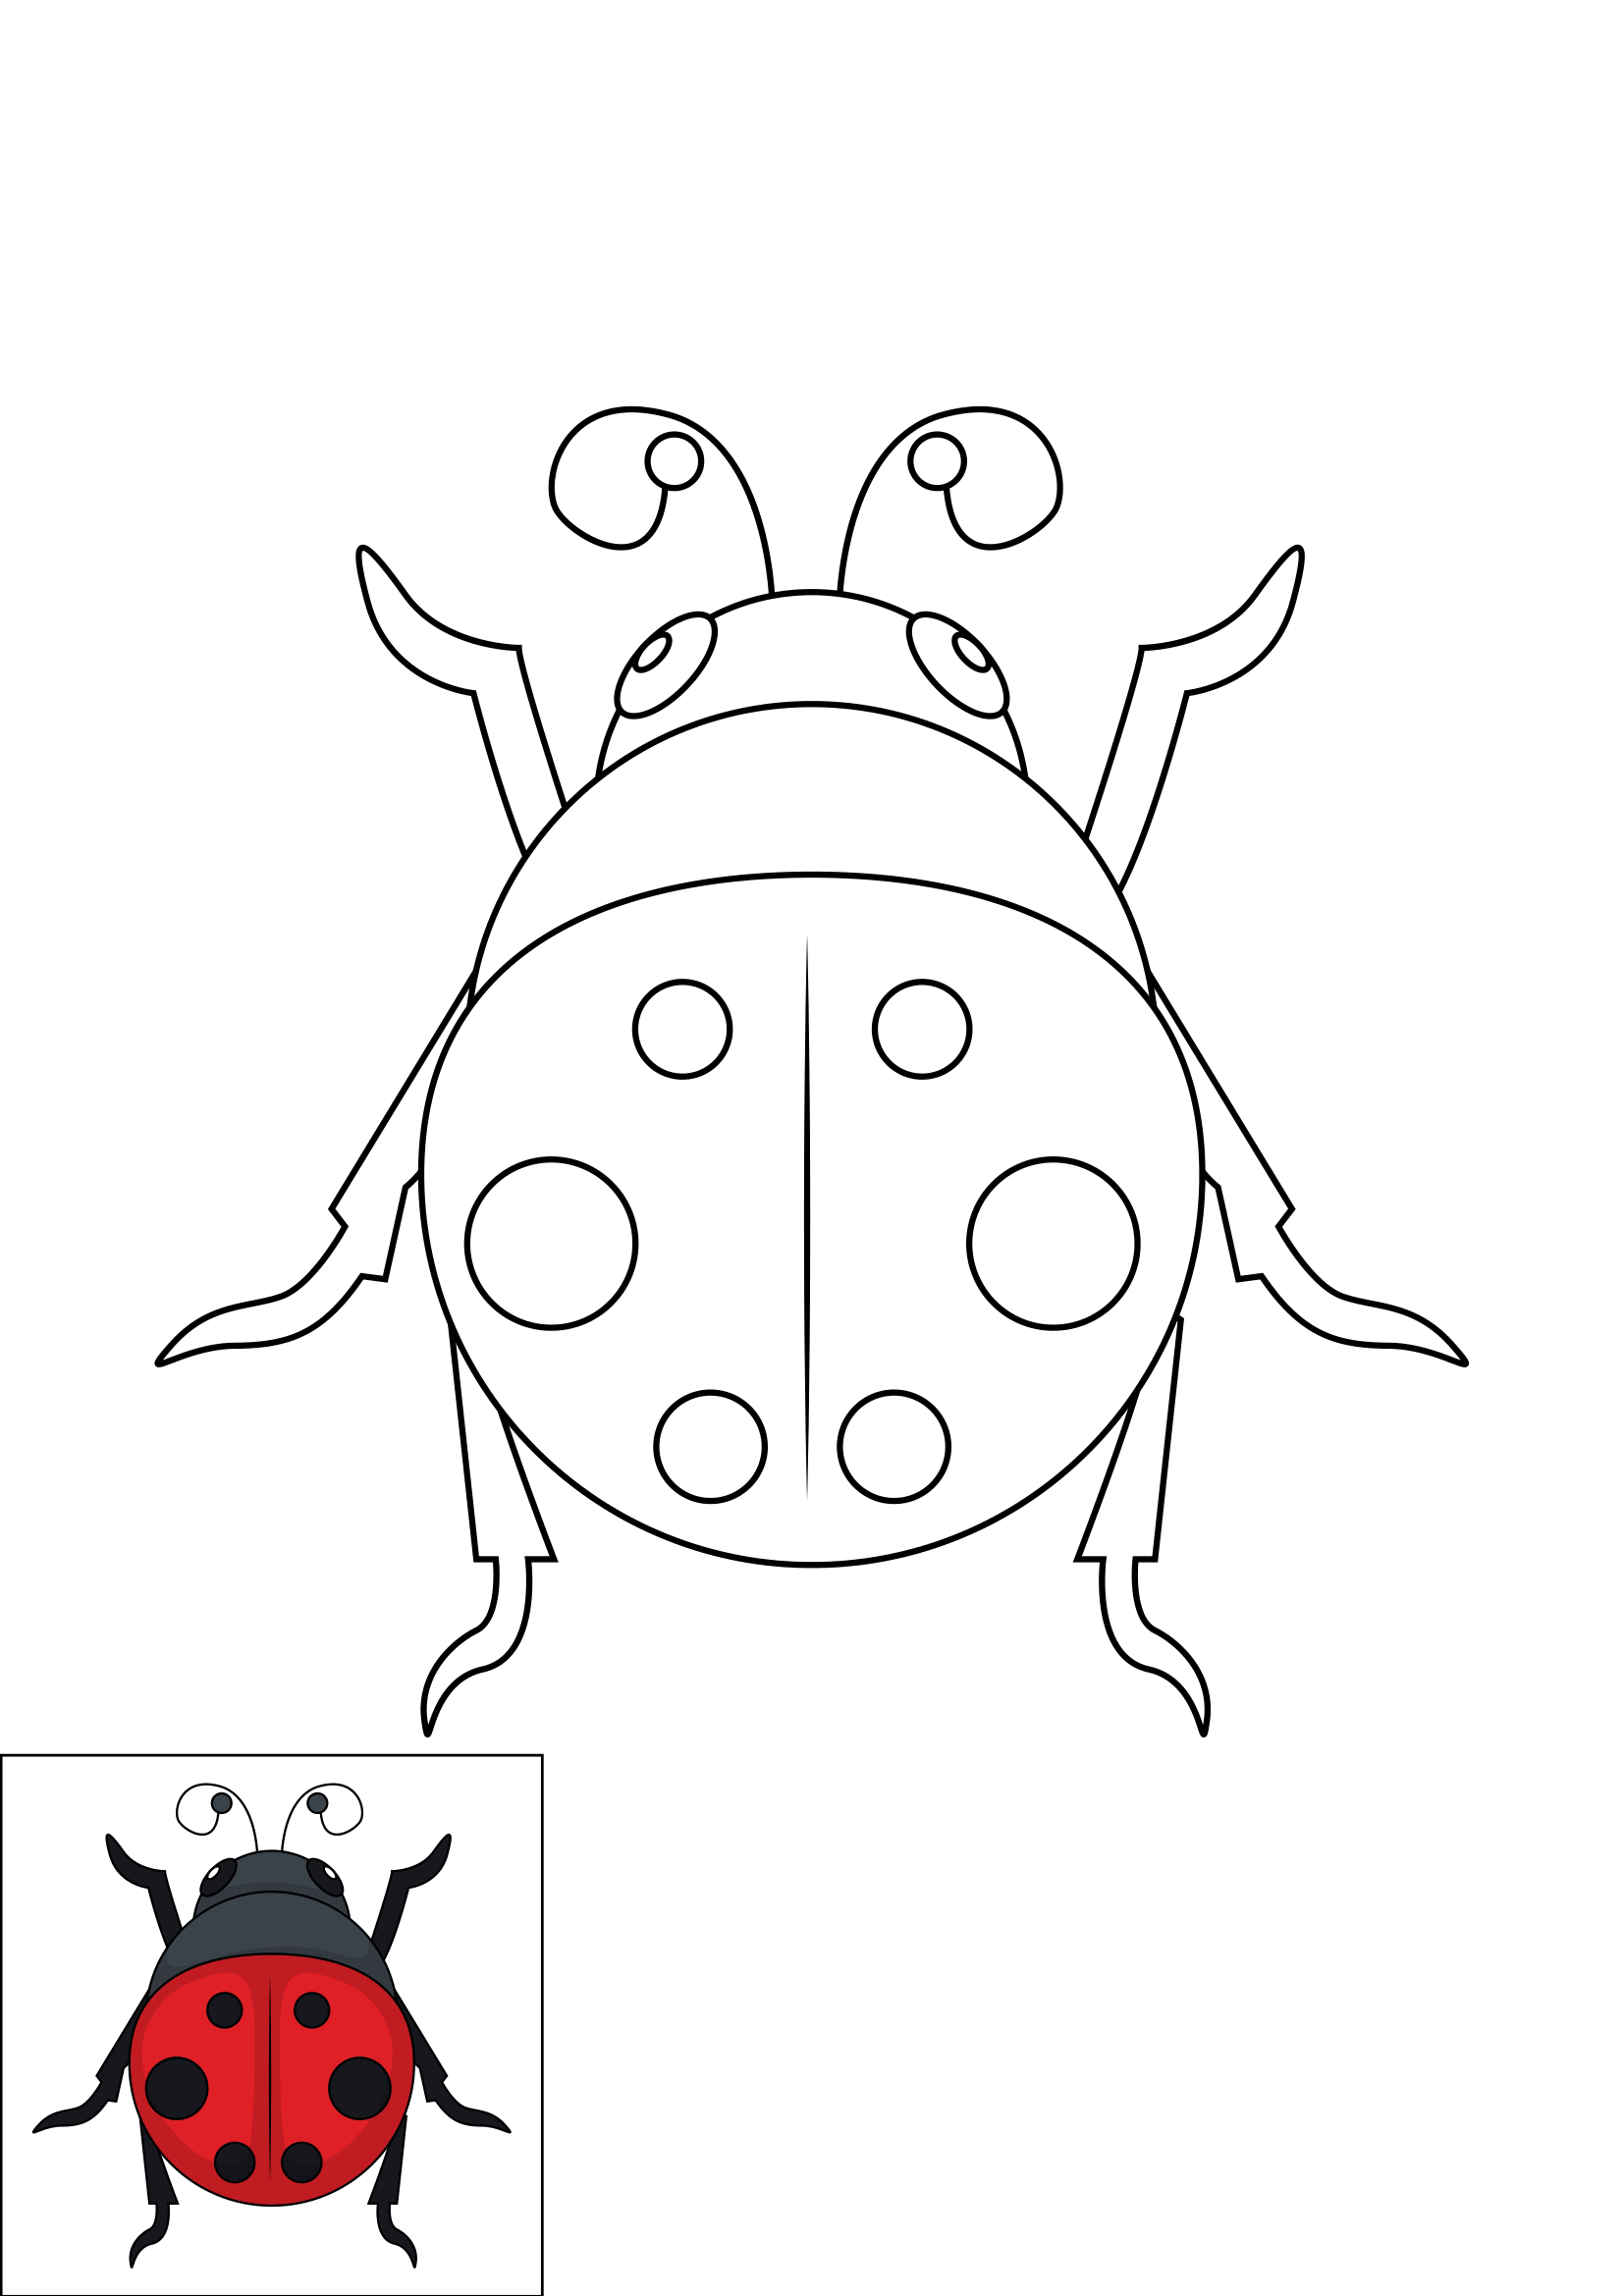 How to Draw A Ladybug Step by Step Printable Color